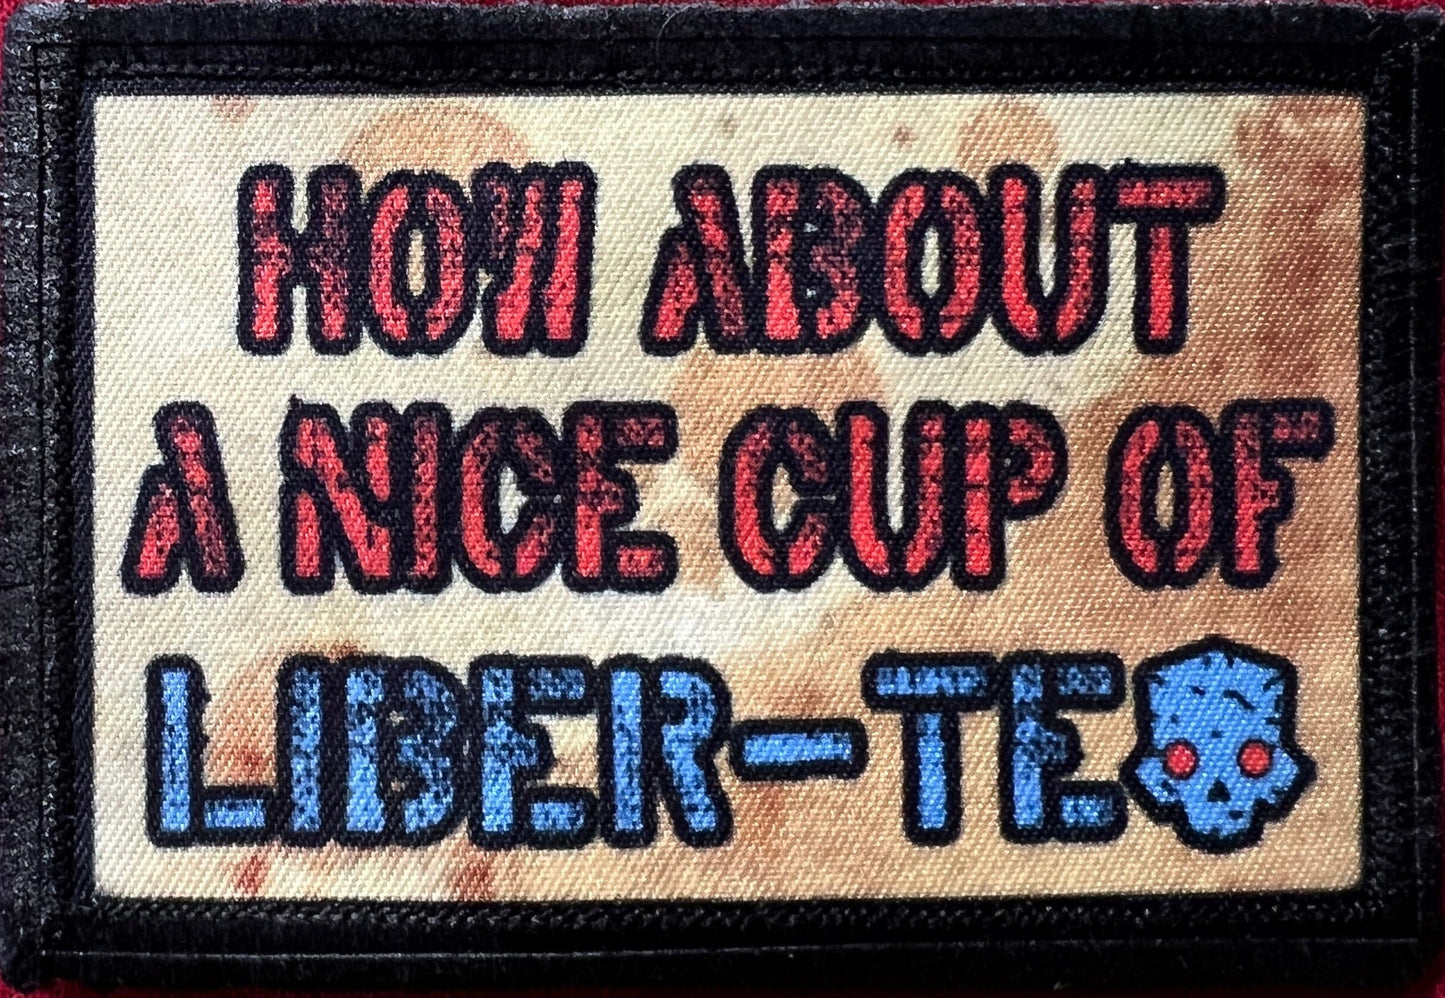 How about a nice cup of liber-tea morale patch